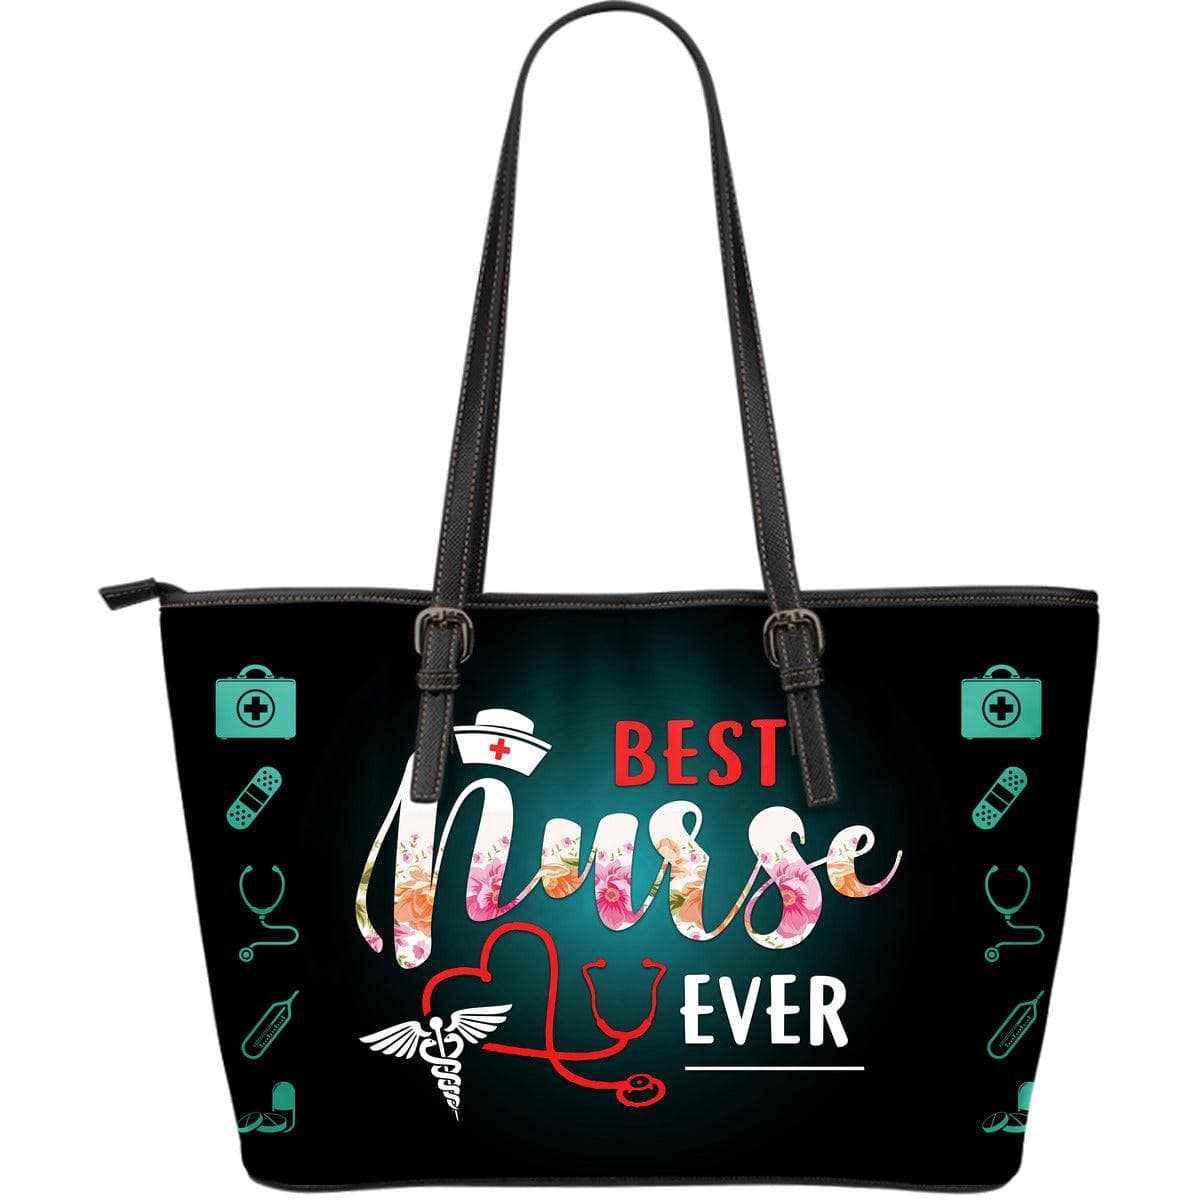  Best Nurse Ever Large Tote Bag, Premium, ultimate in style and functionality: the Extra Large PU Leather Tote Bag.